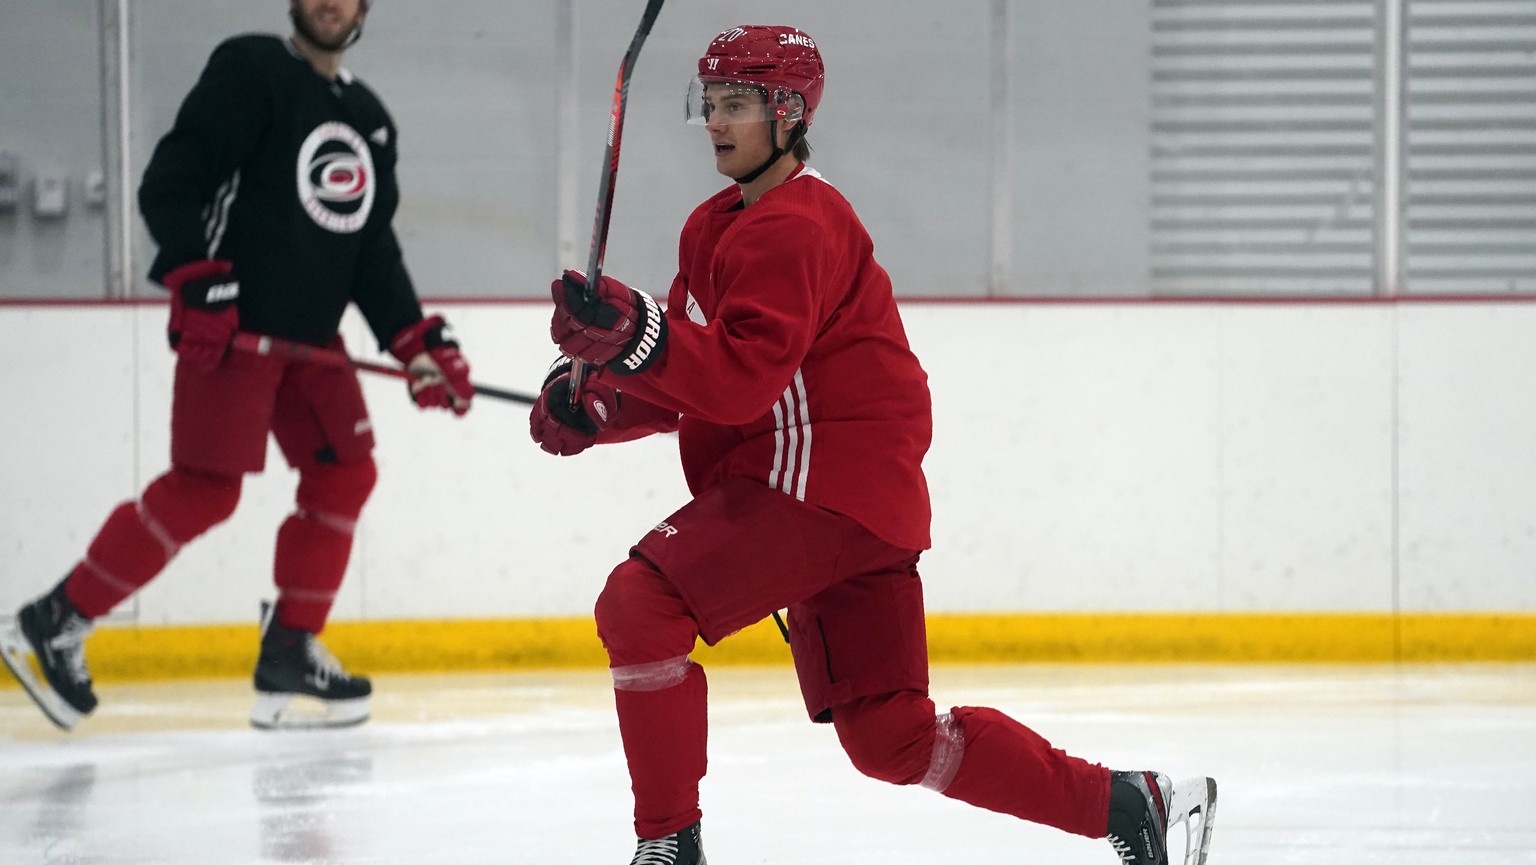 Carolina Hurricanes&#039; Sebastian Aho, of Finland, follows through with a shot during NHL hockey training camp in Morrisville, N.C., Wednesday, Jan. 6, 2021. (AP Photo/Gerry Broome)